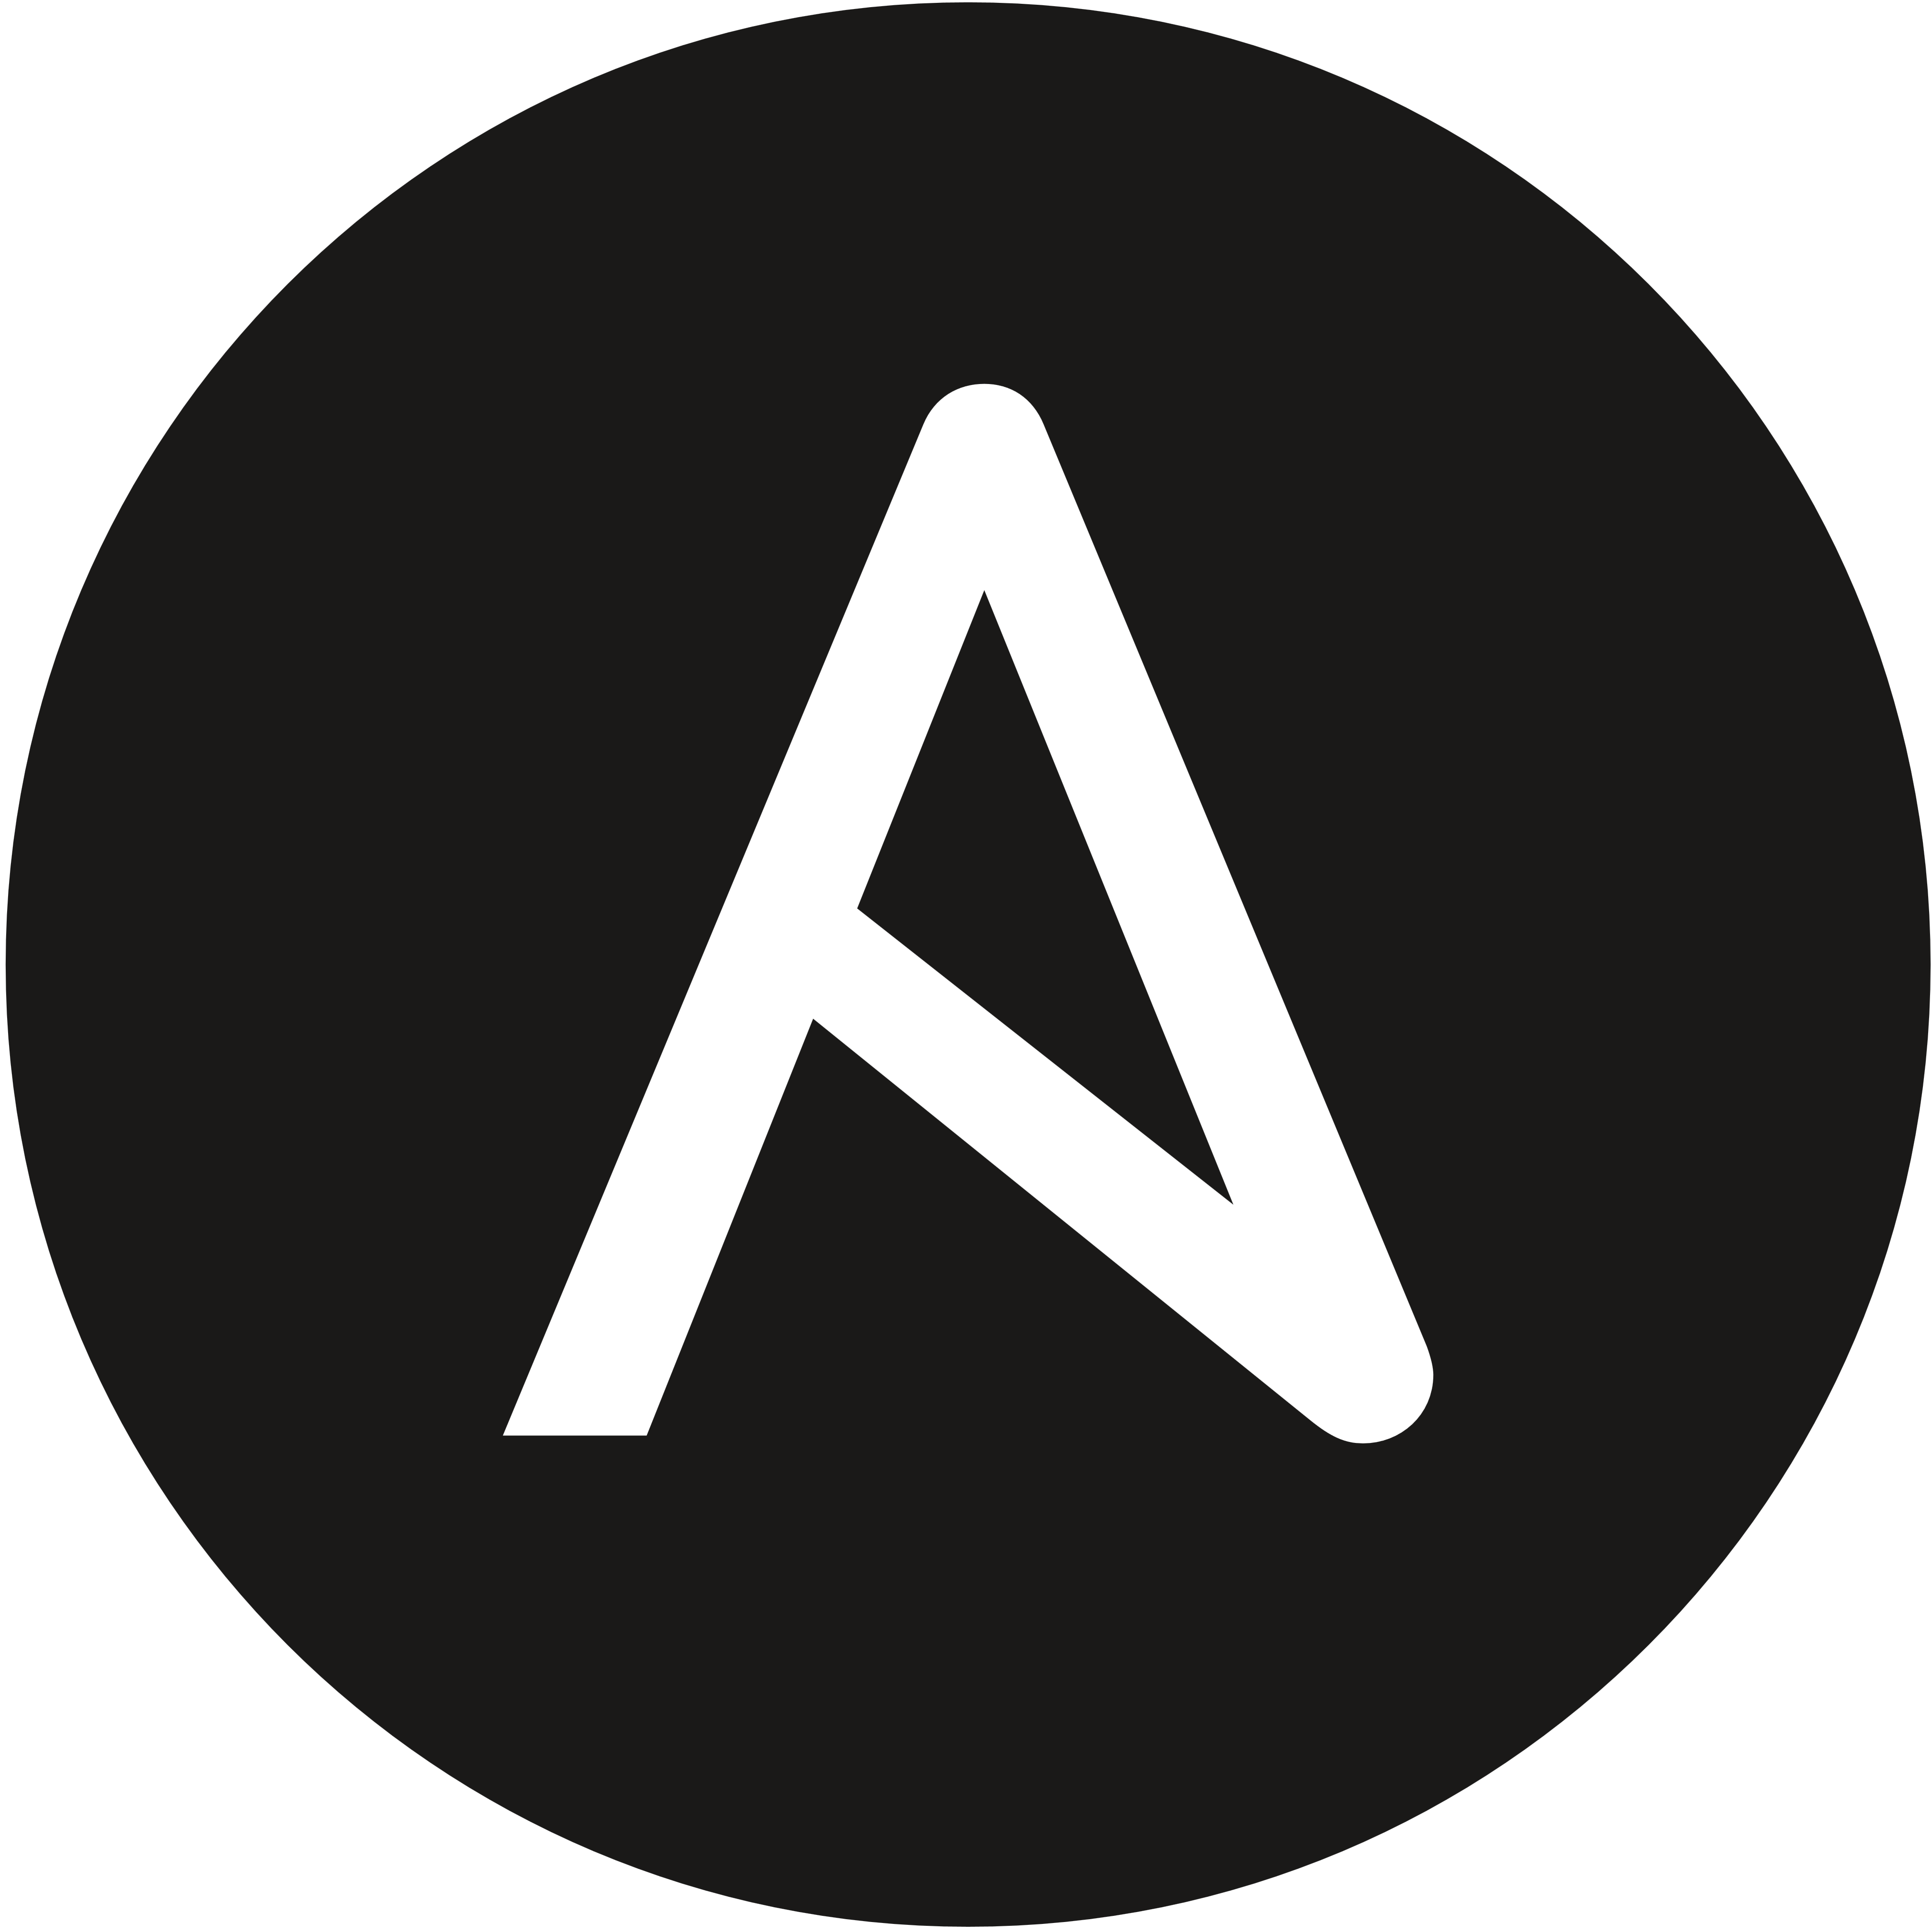 Text changing depending on mode. Light: 'Ansible Logo Light Mode' Dark: 'Ansible Logo Dark Mode'